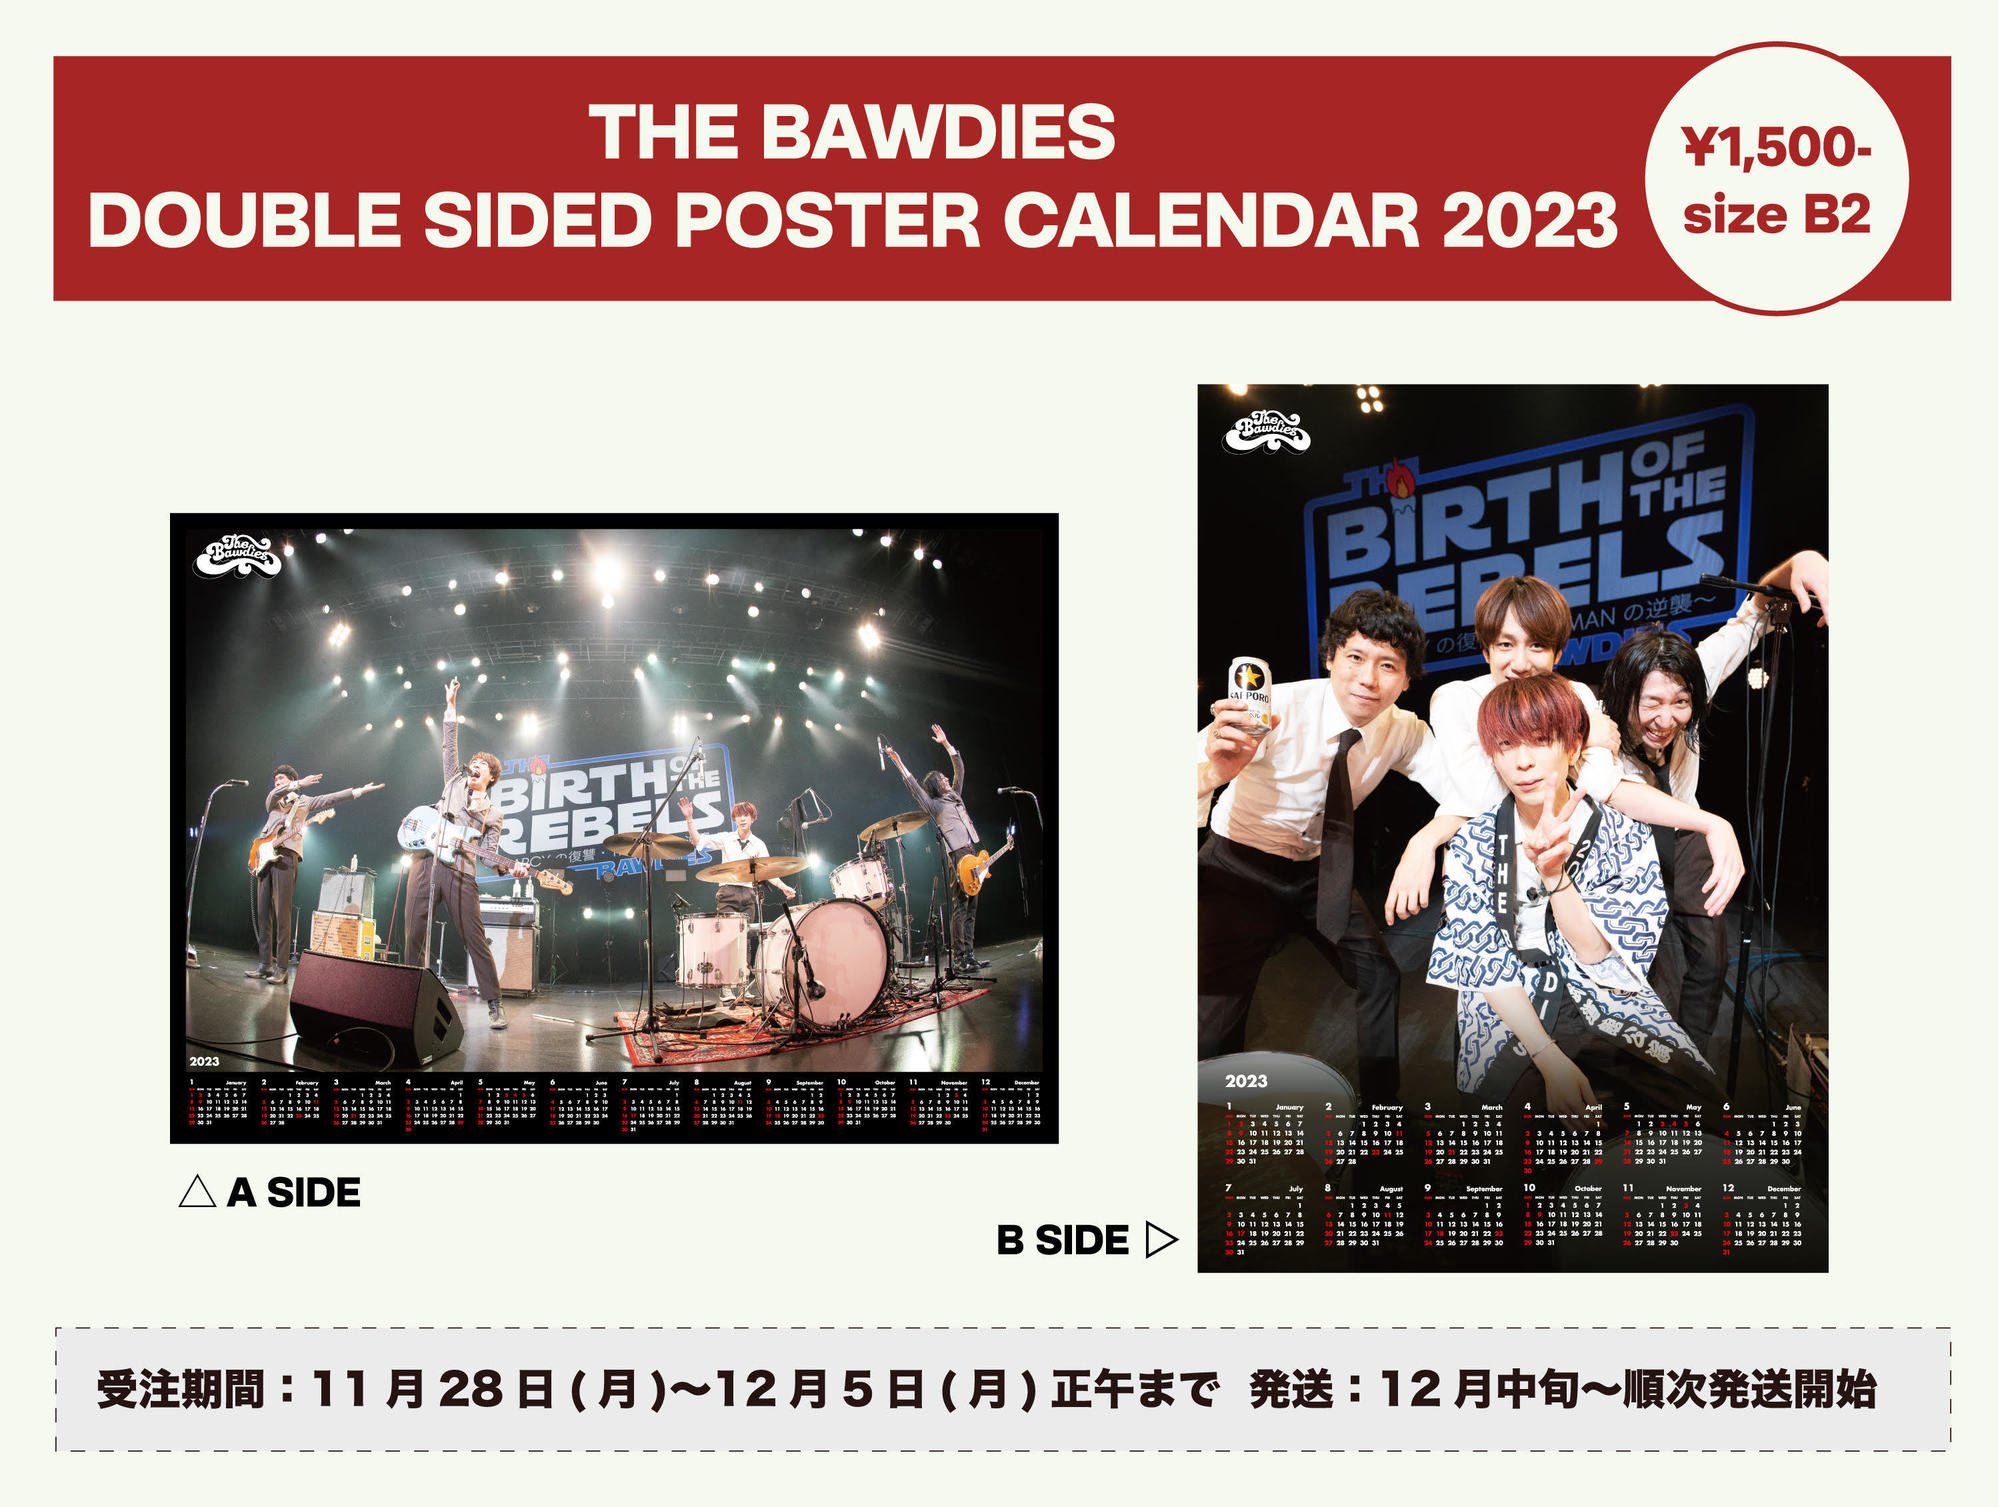 THE BAWDIES / LIVE PHOTO「DOUBLE SIDED POSTER CALENDAR 2023」受注販売開始！